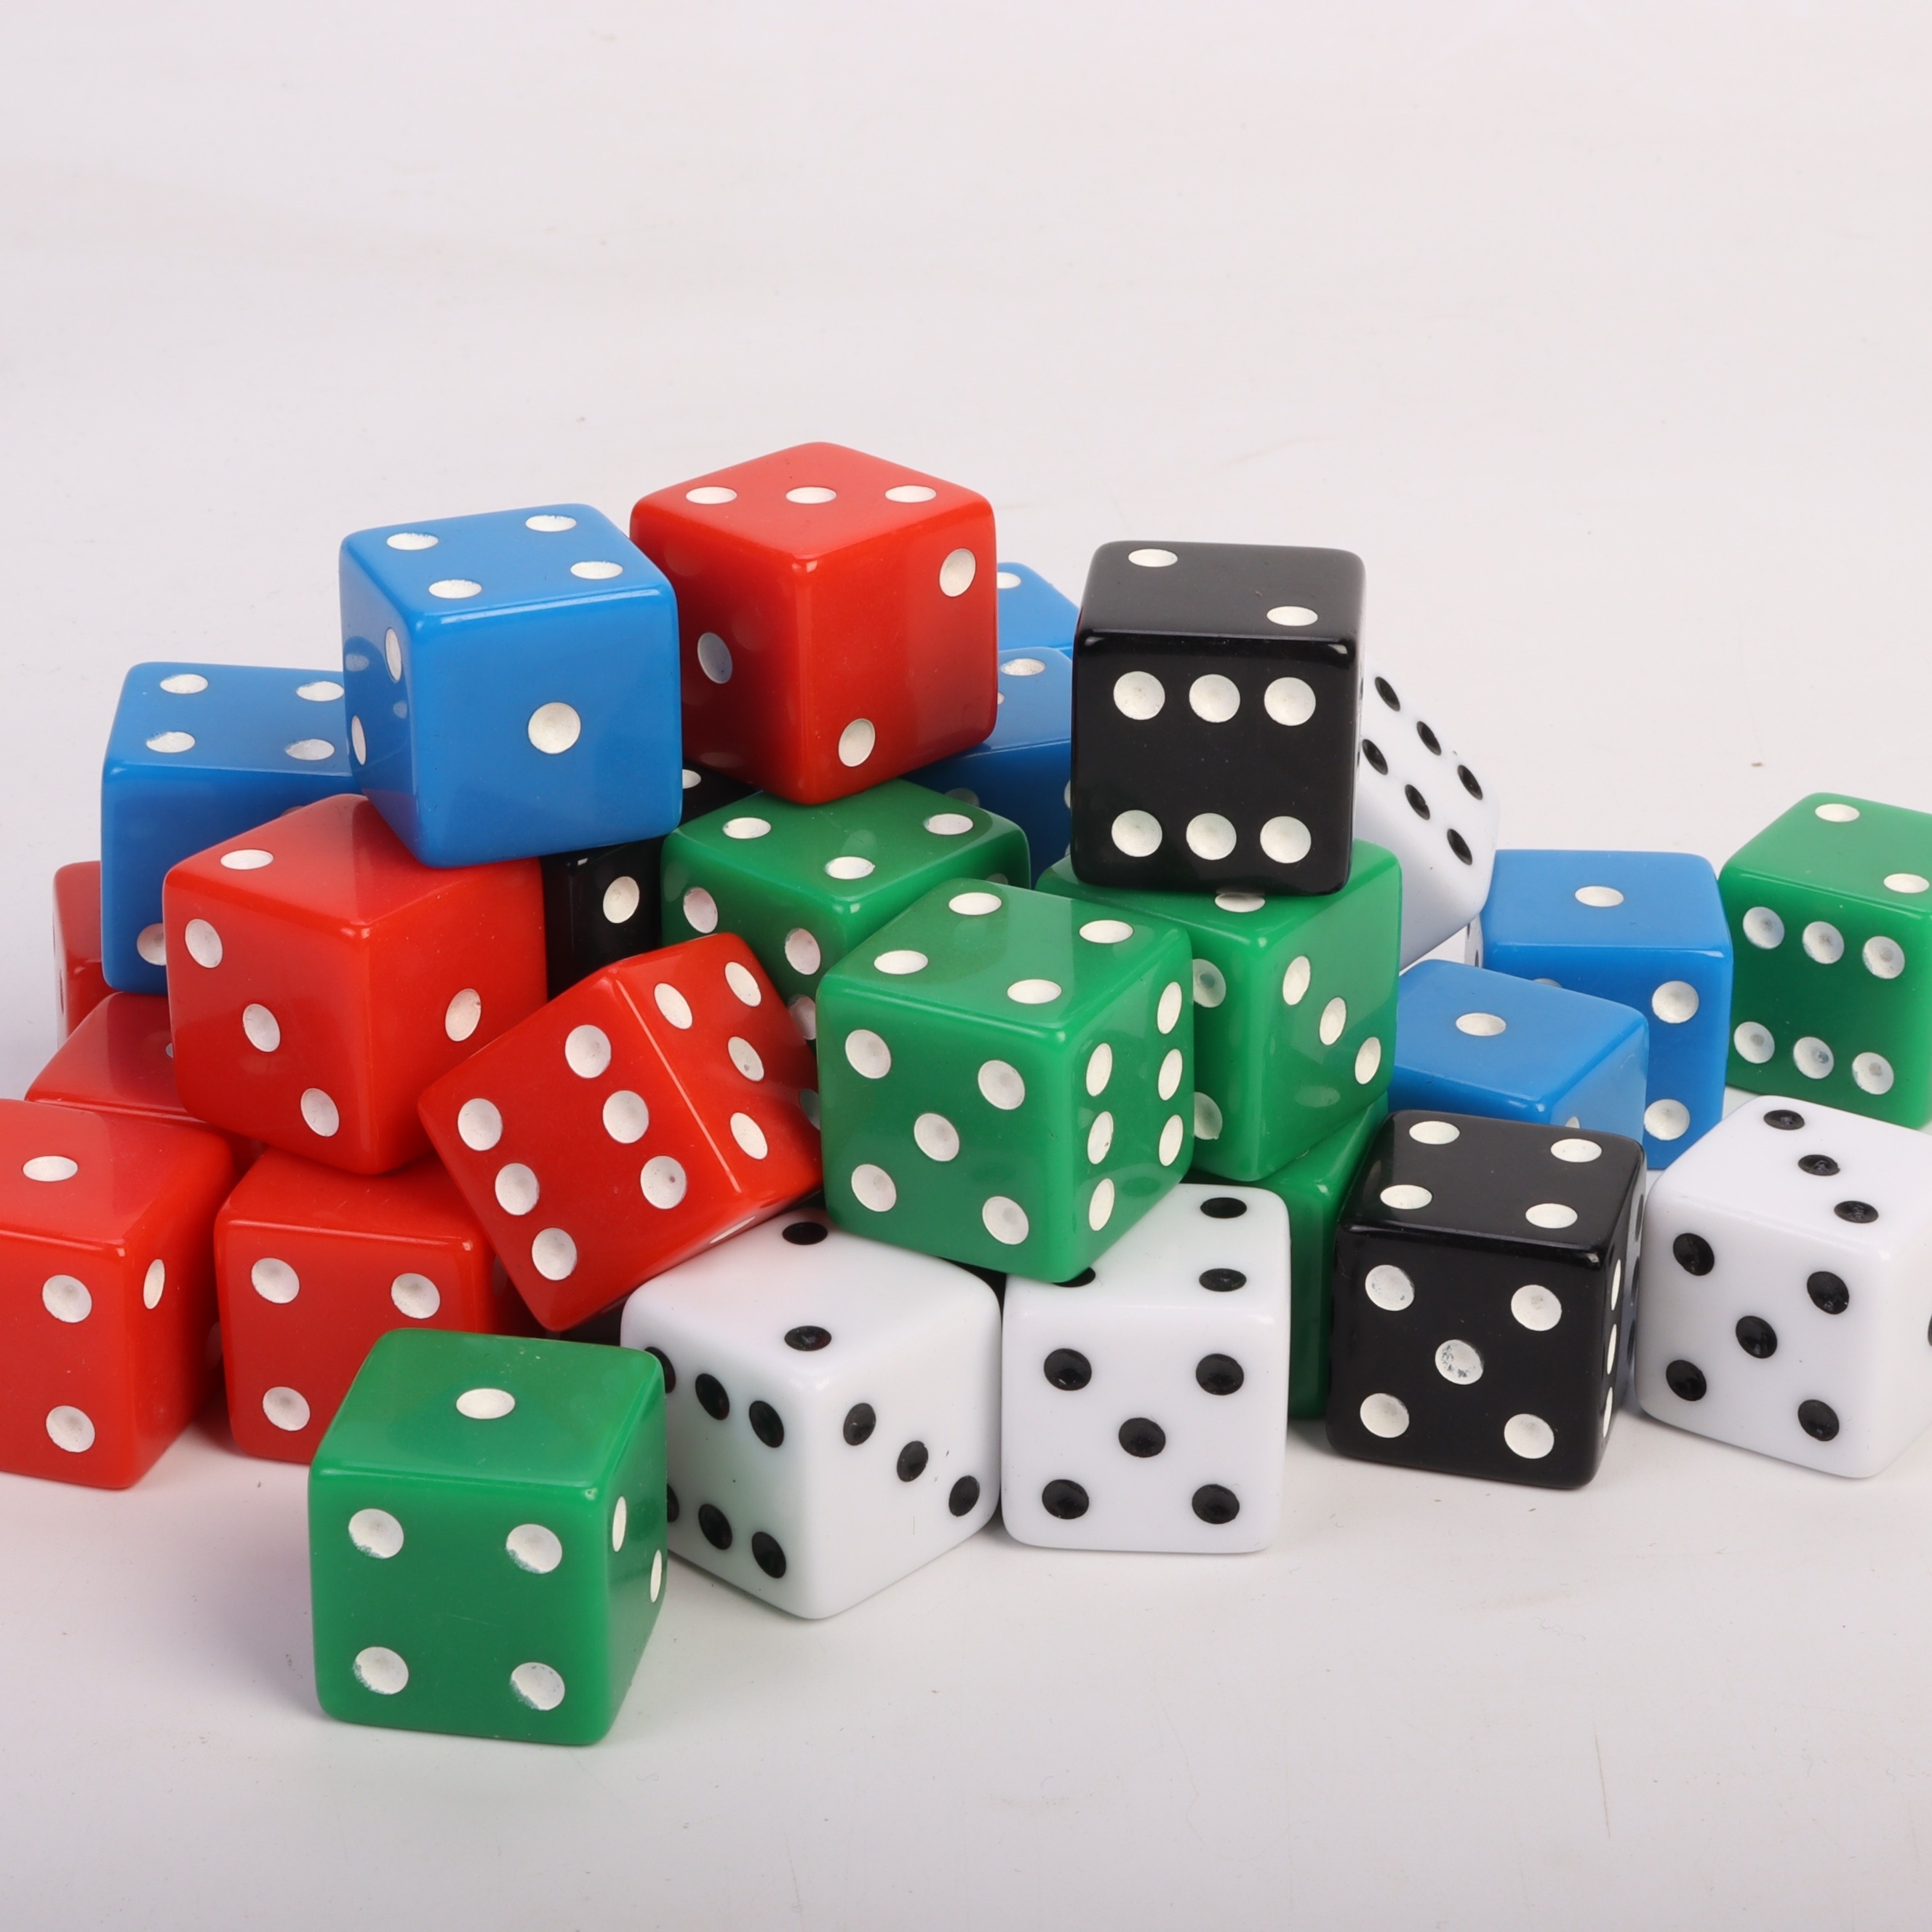 

Jumbo 25mm Colorful Game Dice Set - 6 Sided, Acrylic, Perfect For Parties & Board Games, Available In 5 Colors